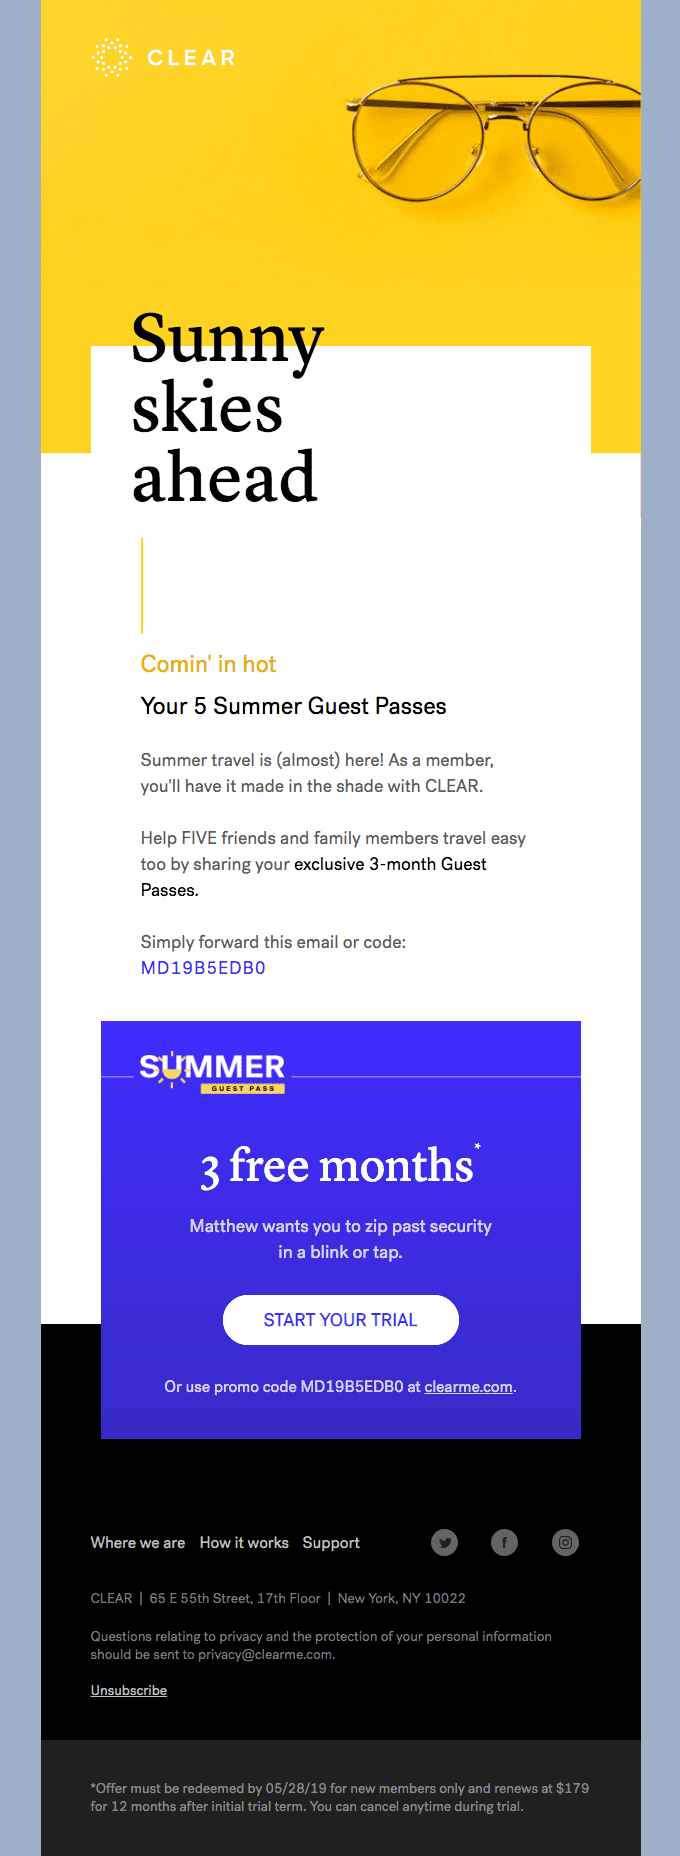 your 5 summer guest passes are here